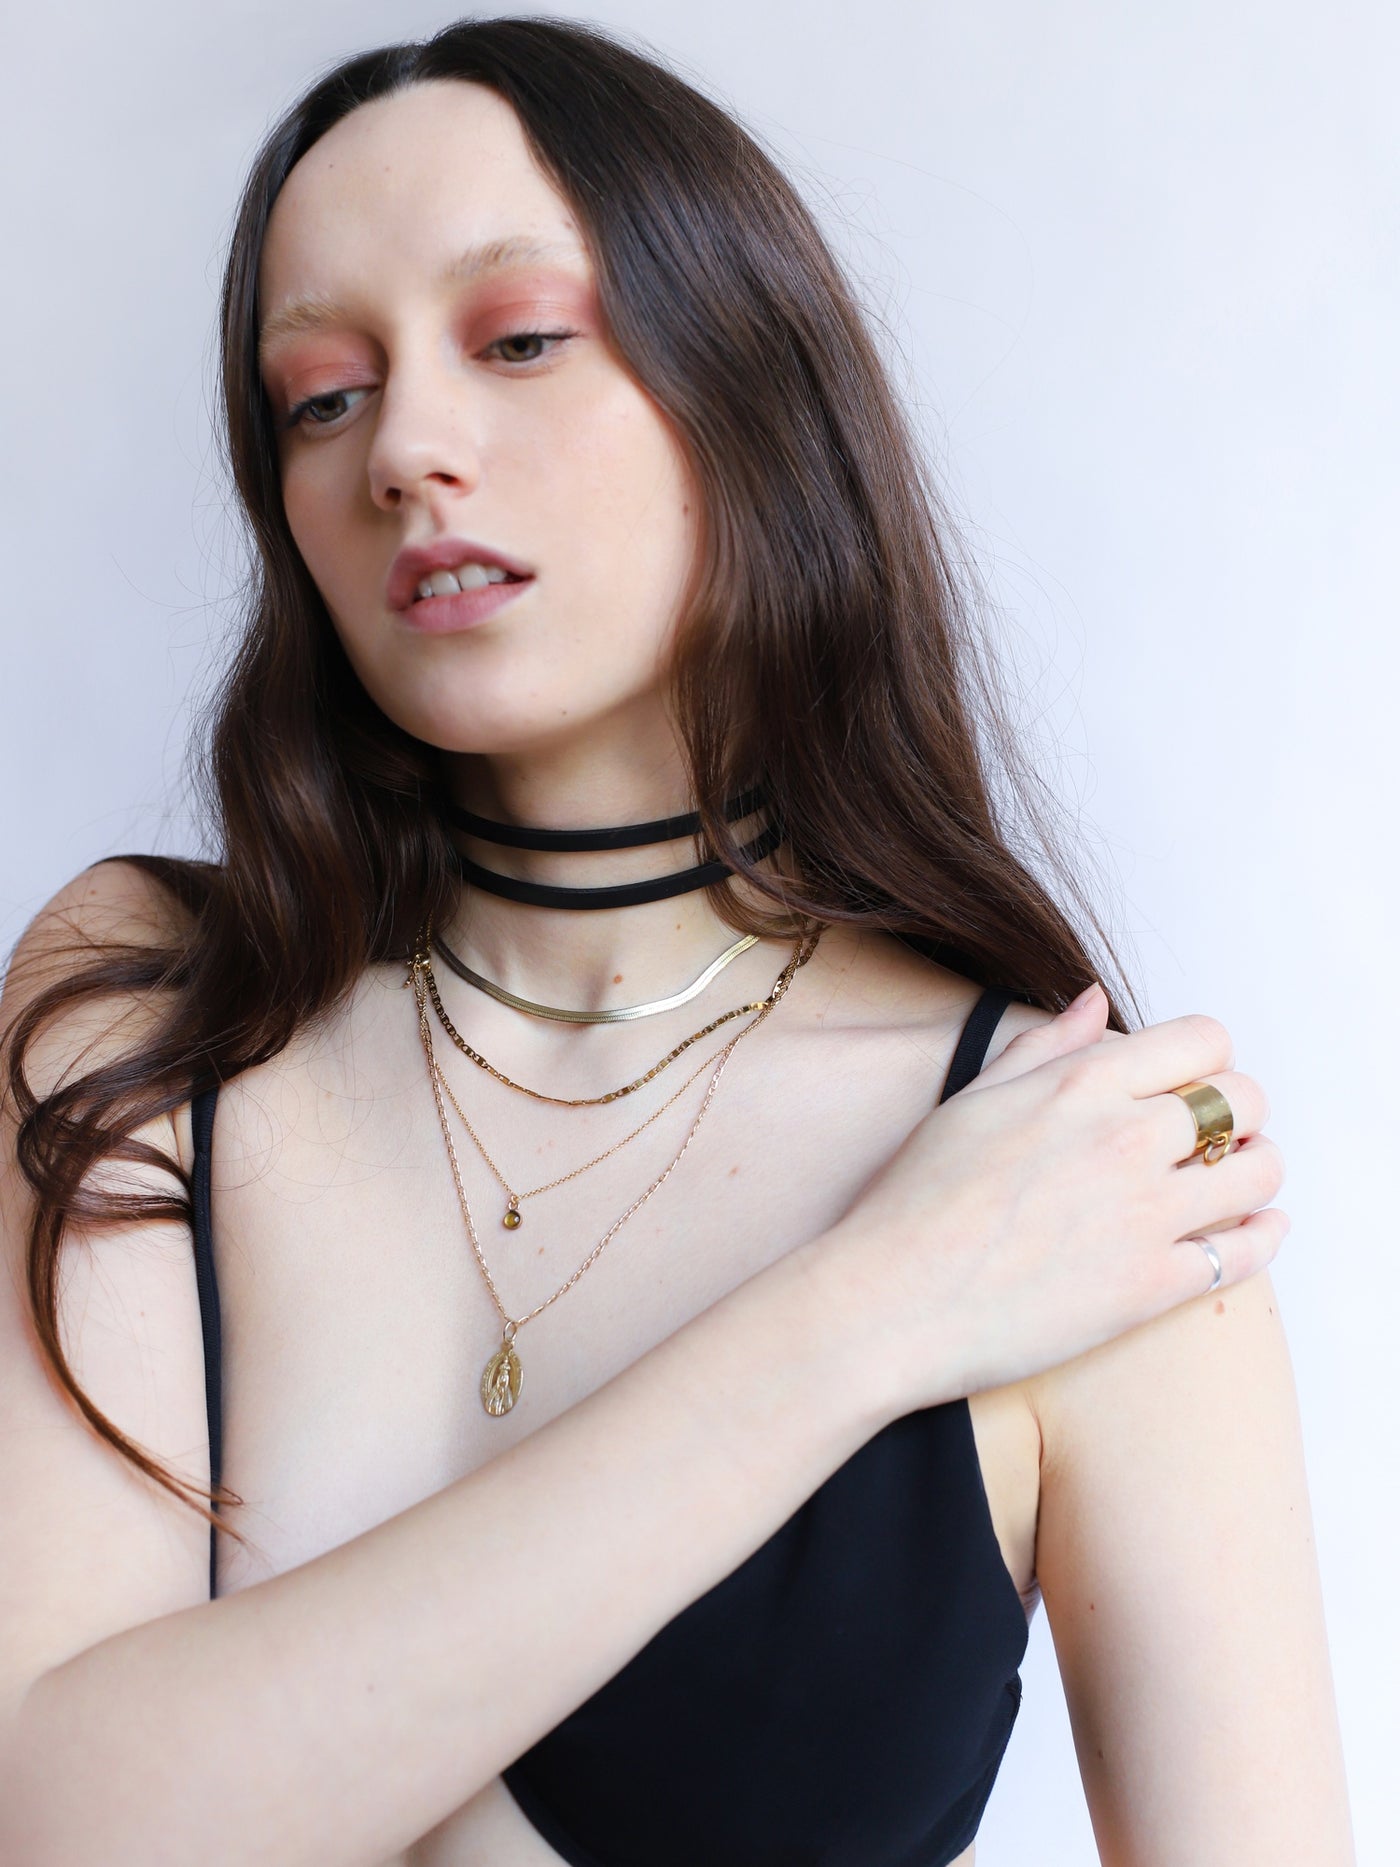 Tessa wearing the Polly choker in motion by Baby turns Blue Paris